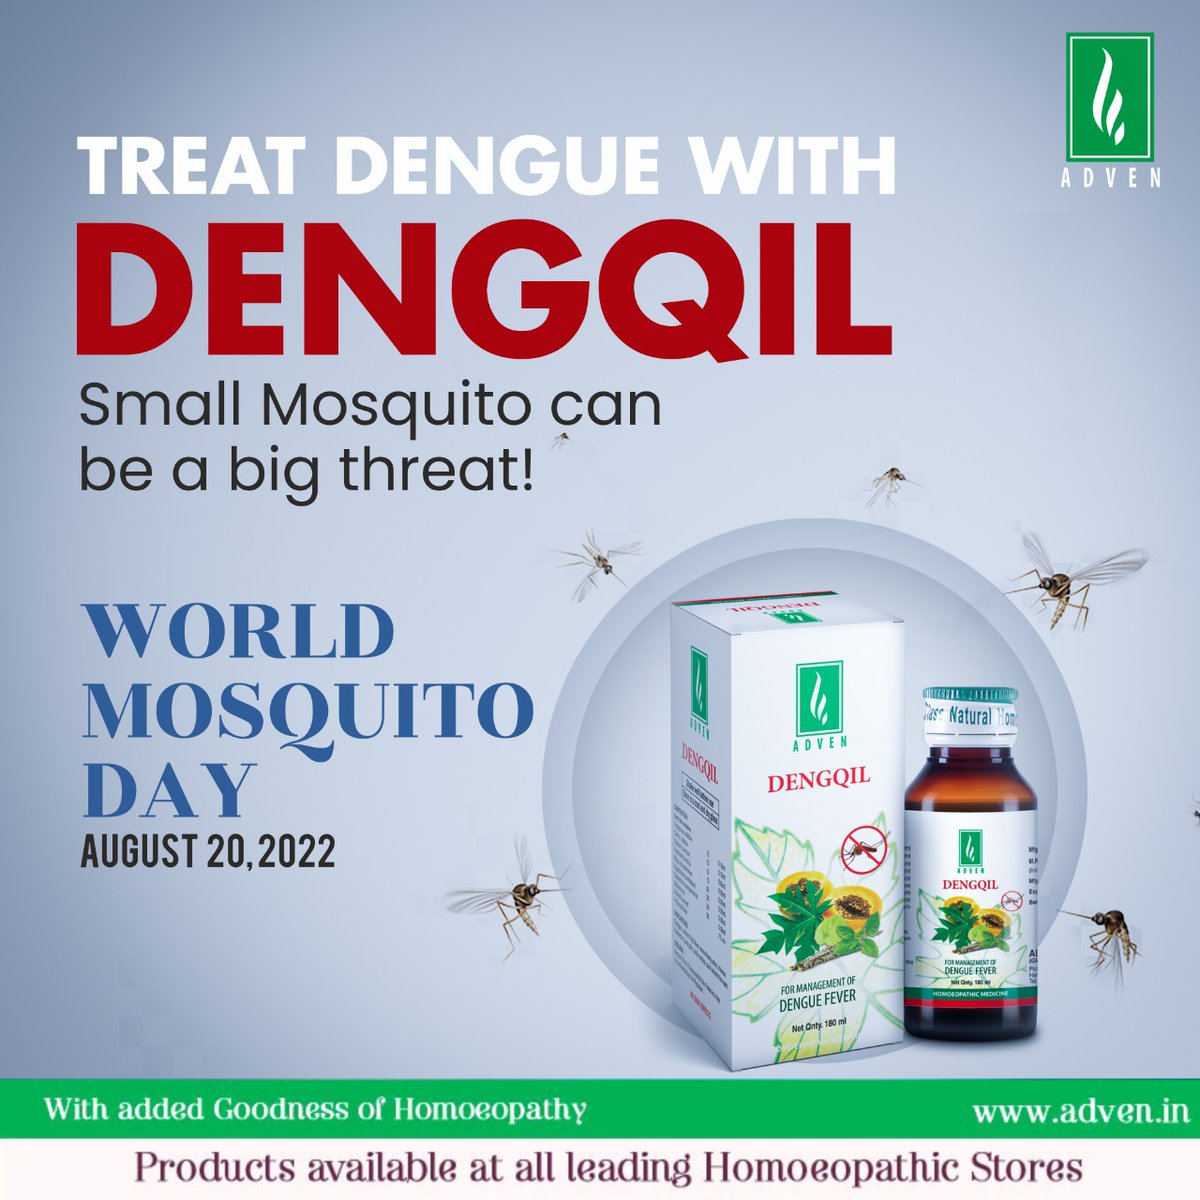 This monsoon season - Stay Safe, Stay Healthy.

World Mosquito Day

adven.in/dengqil-syrup.…
#WorldMosquitoDay #MosquitoDay #mosquito #worldmosquitoday2022 #mosquitos #awareness #DENGQIL #ADVEN #Homoeopathy #HomoeopathicMedicine #advenbiotechpvtltd @ADVENBIOTECH